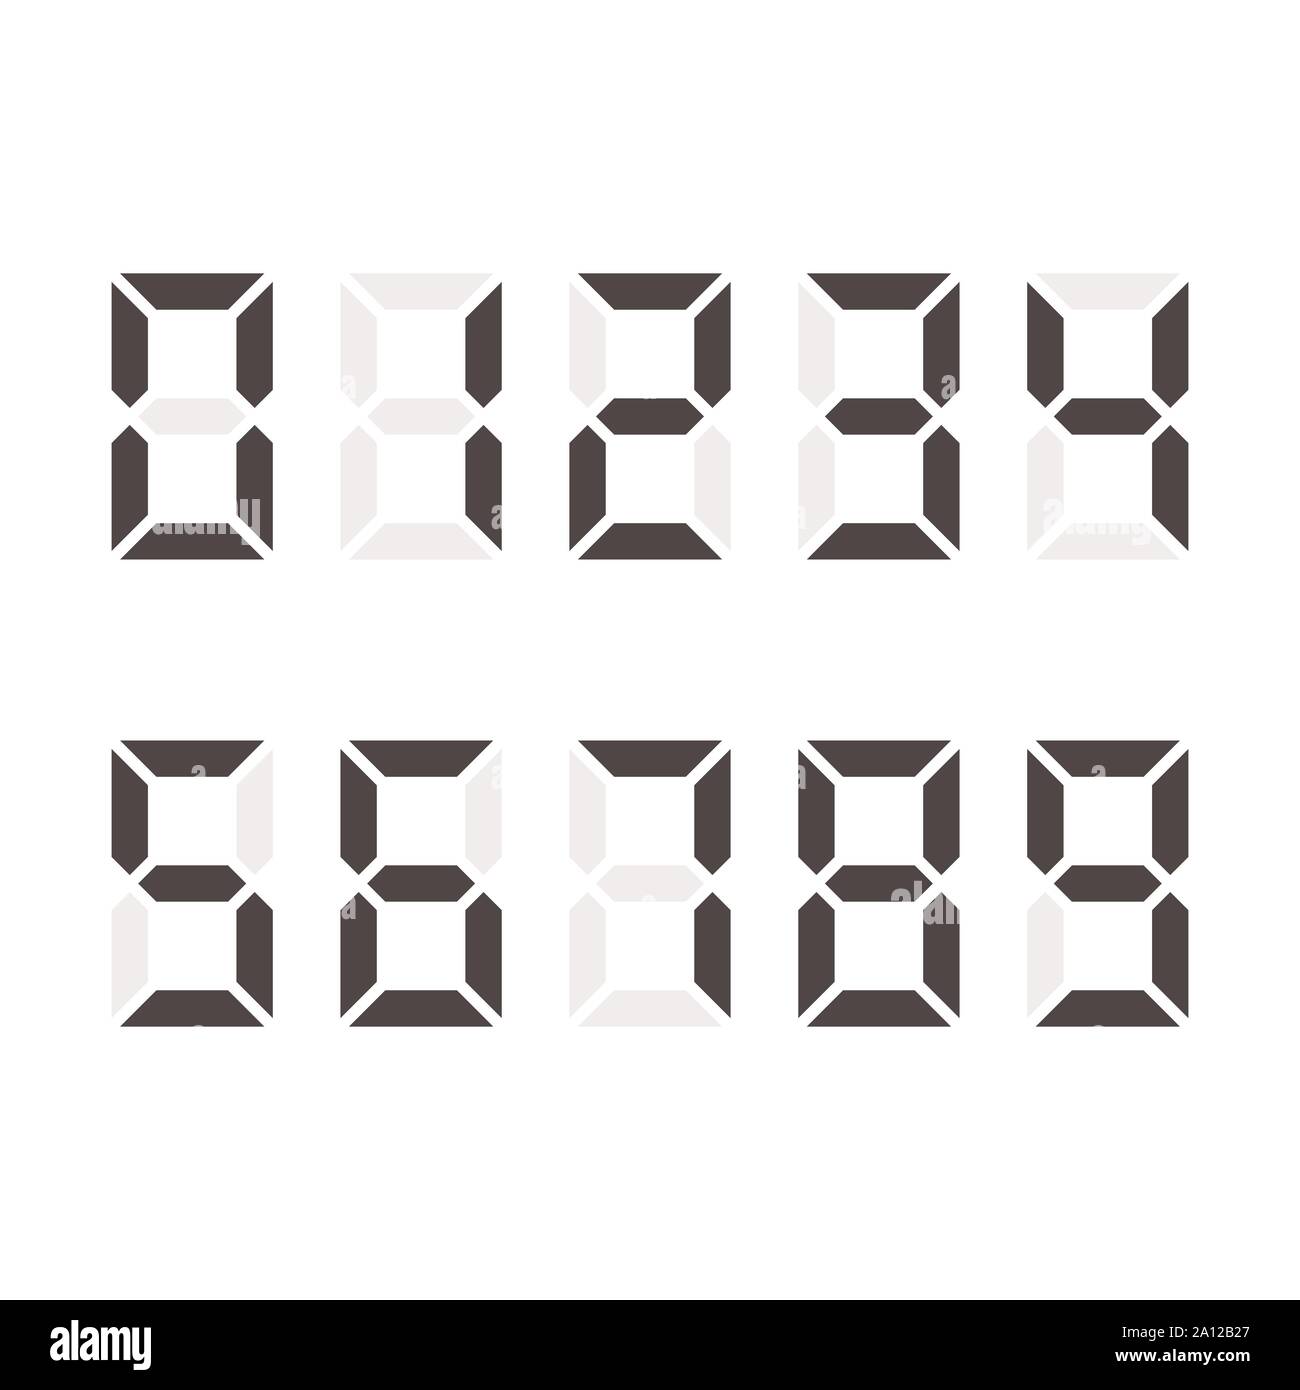 Digital numbers set. Digital number font text. Vector illustration isolated on white background Stock Vector